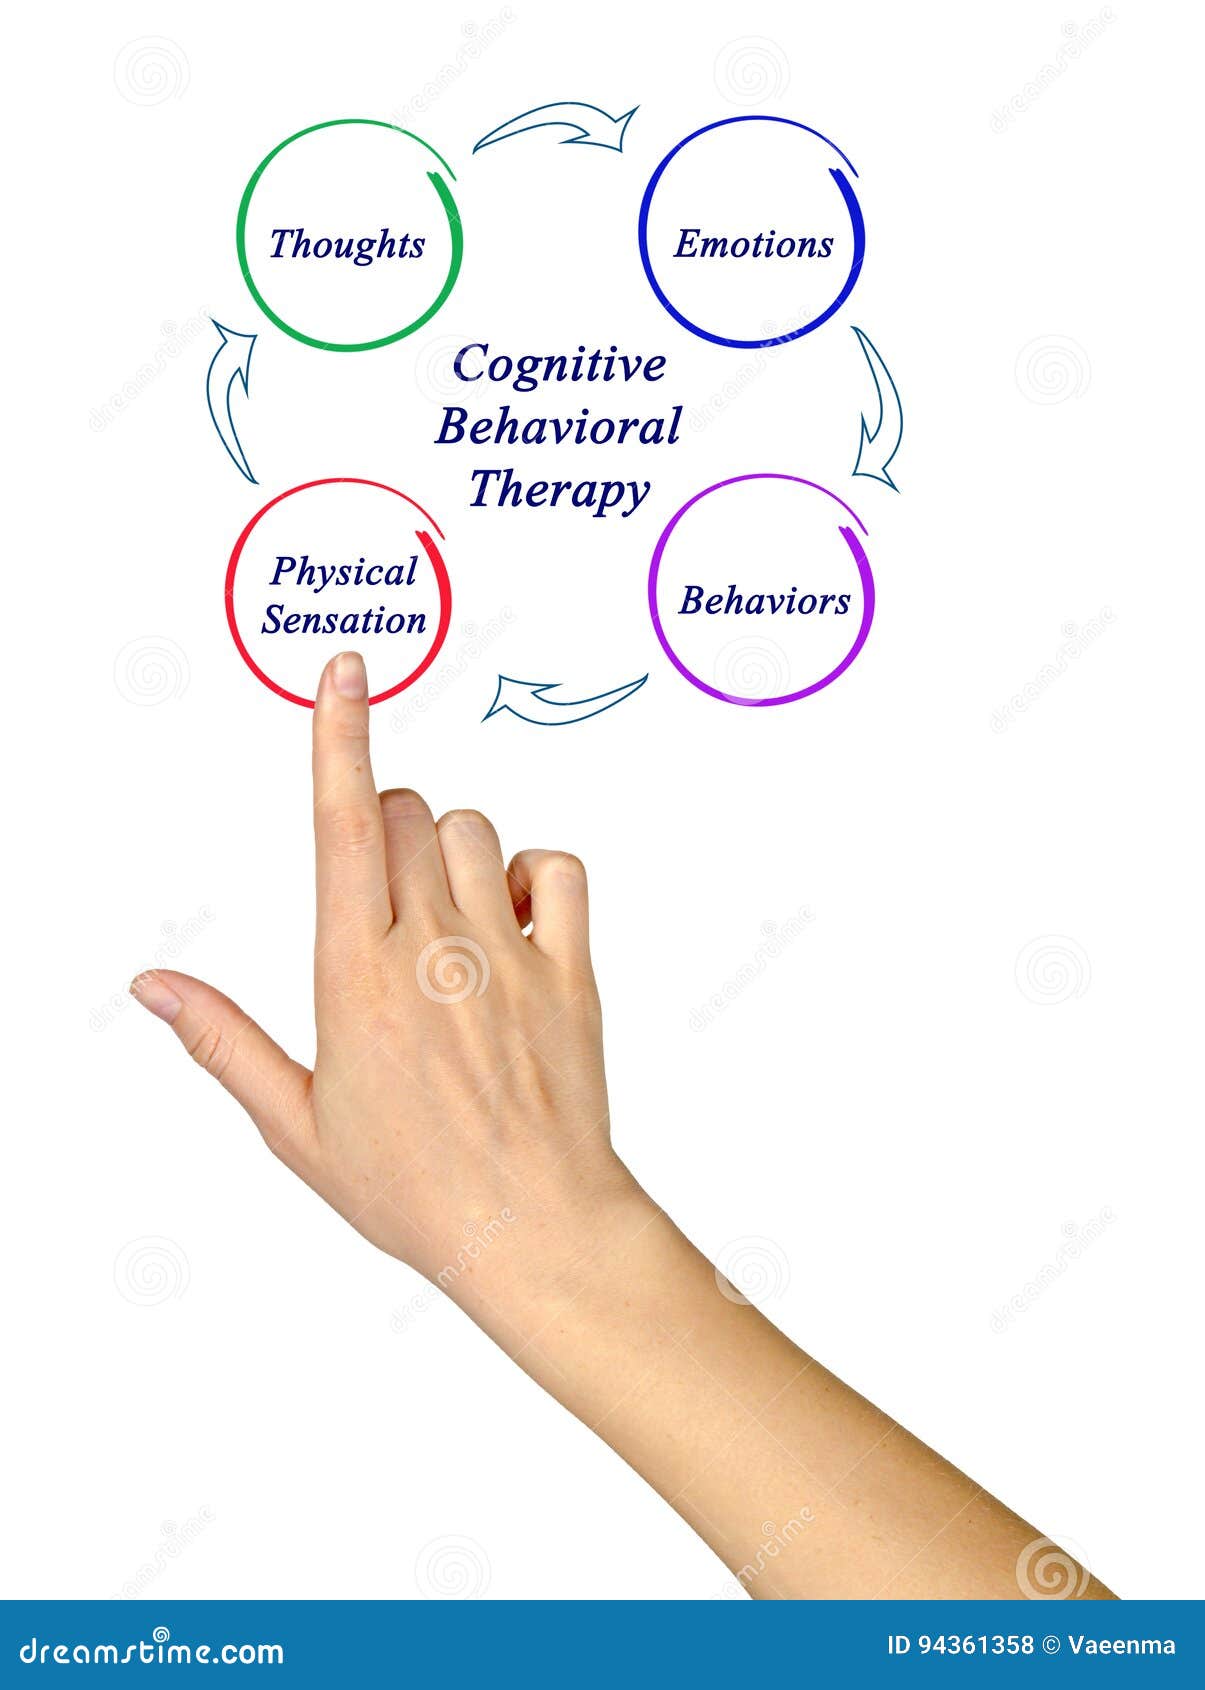 cognitive-behavioral therapy